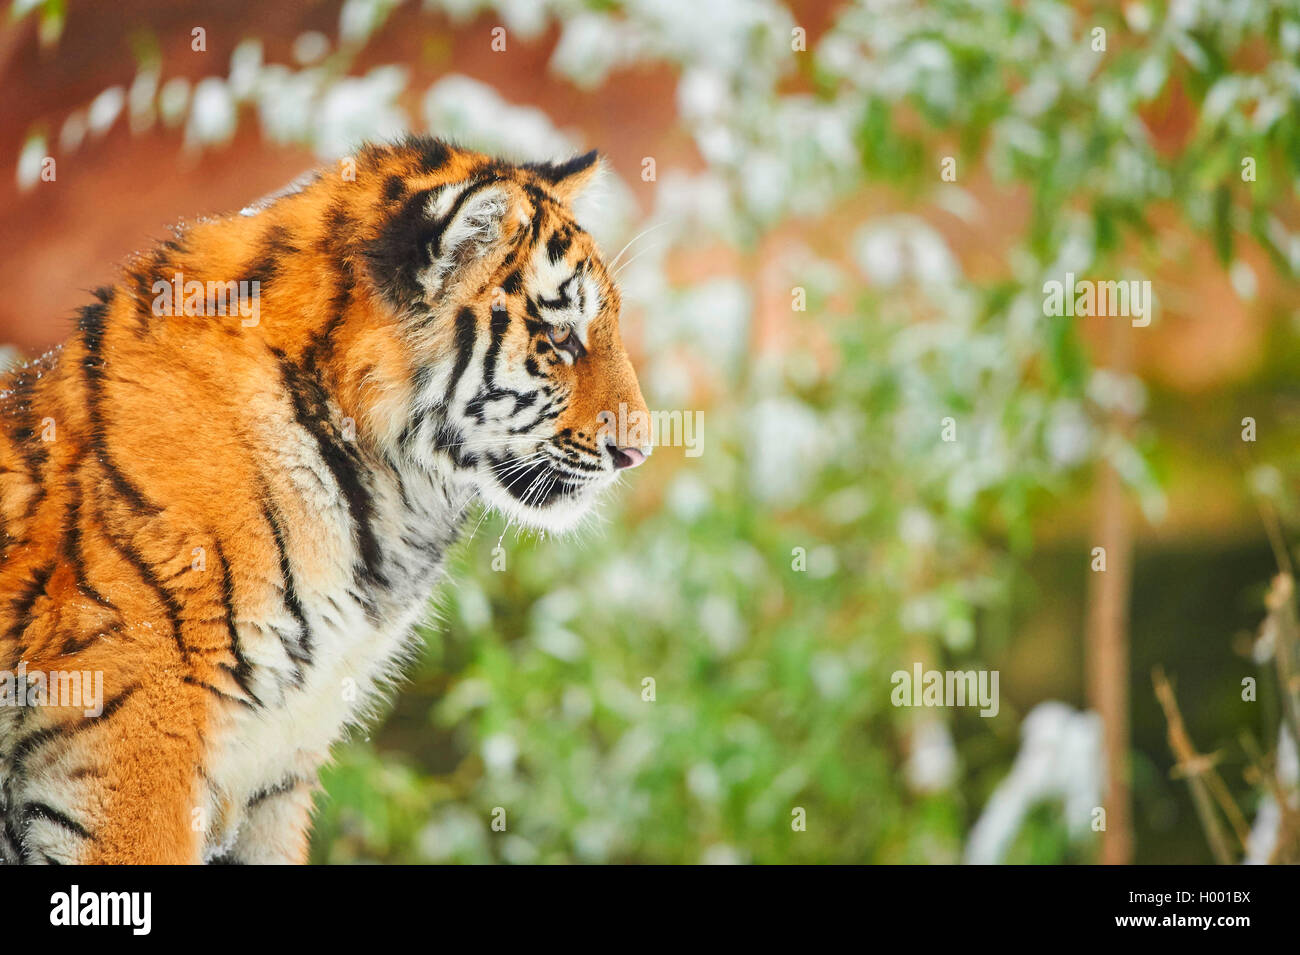 Siberian tiger, Amurian tiger (Panthera tigris altaica), young animal portrait in winter, side view Stock Photo